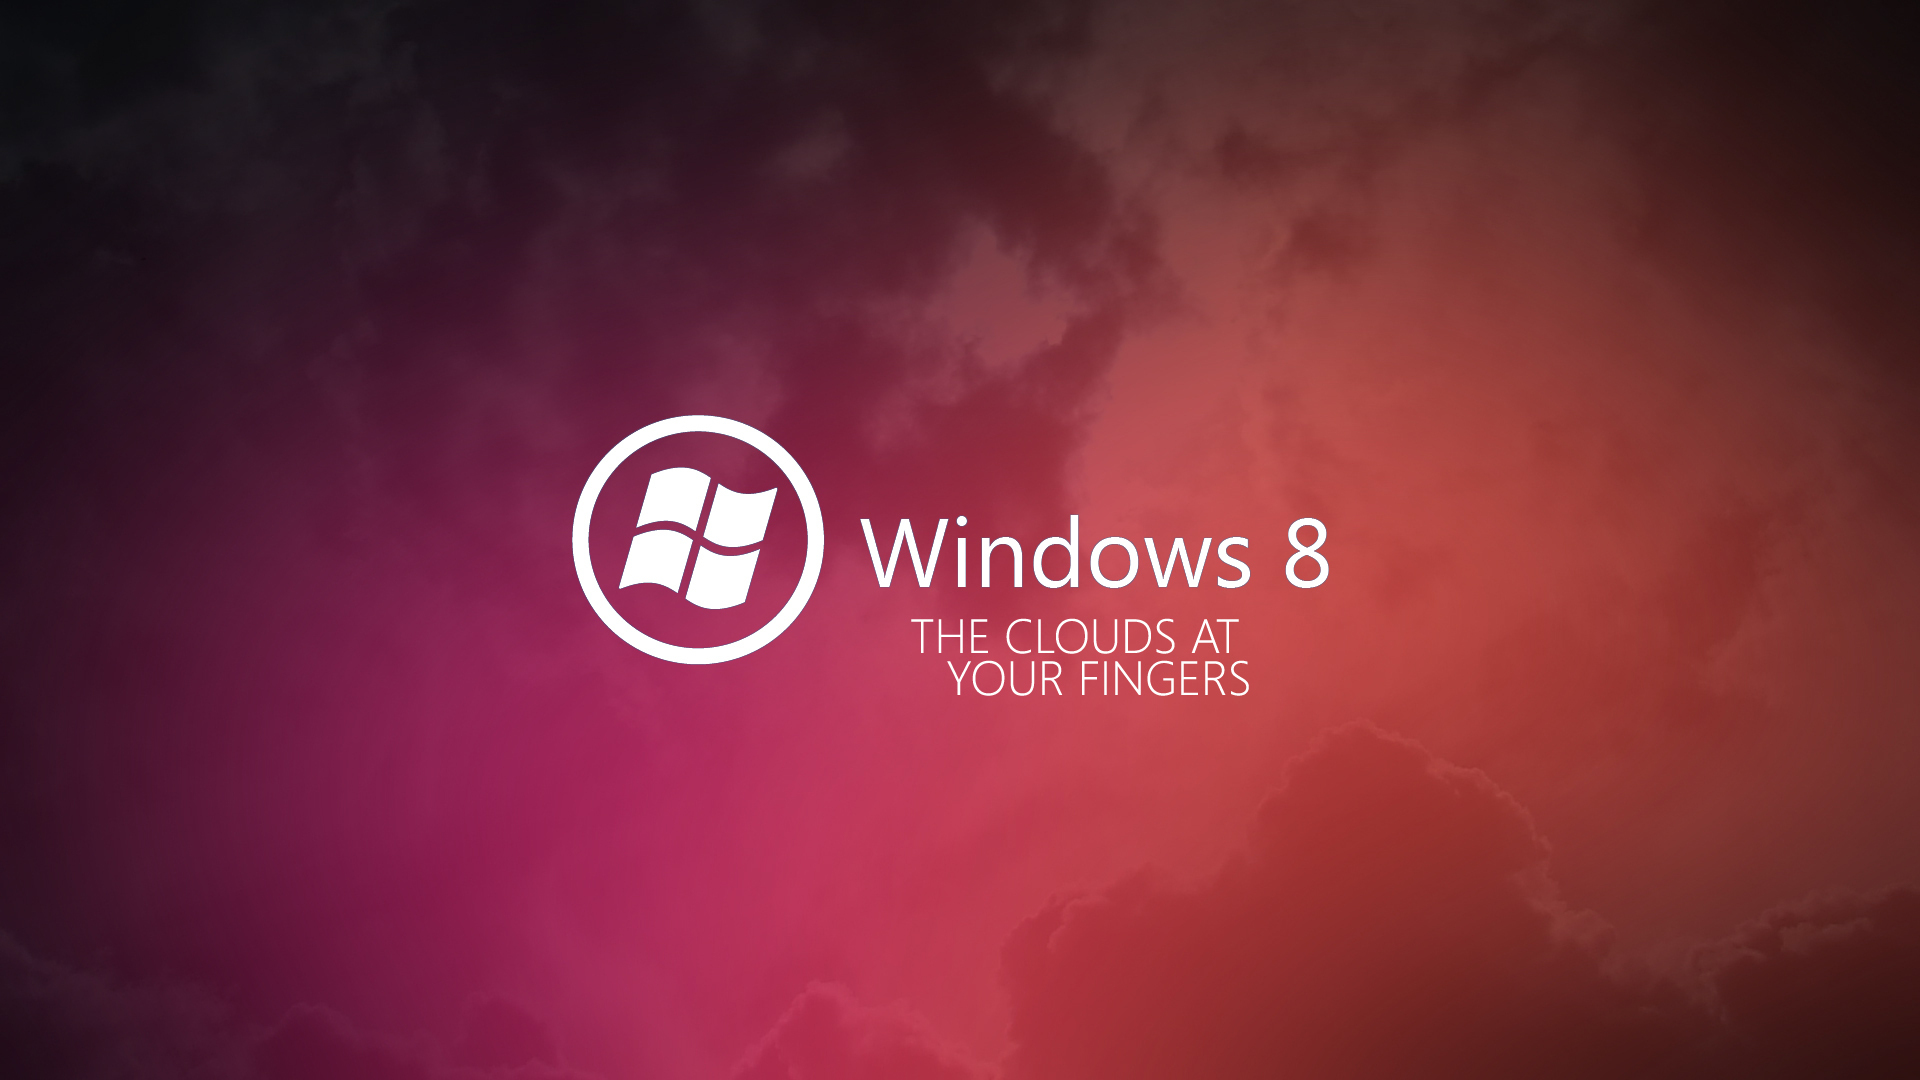 Wallpapers windows 8 new OS operating system on the desktop